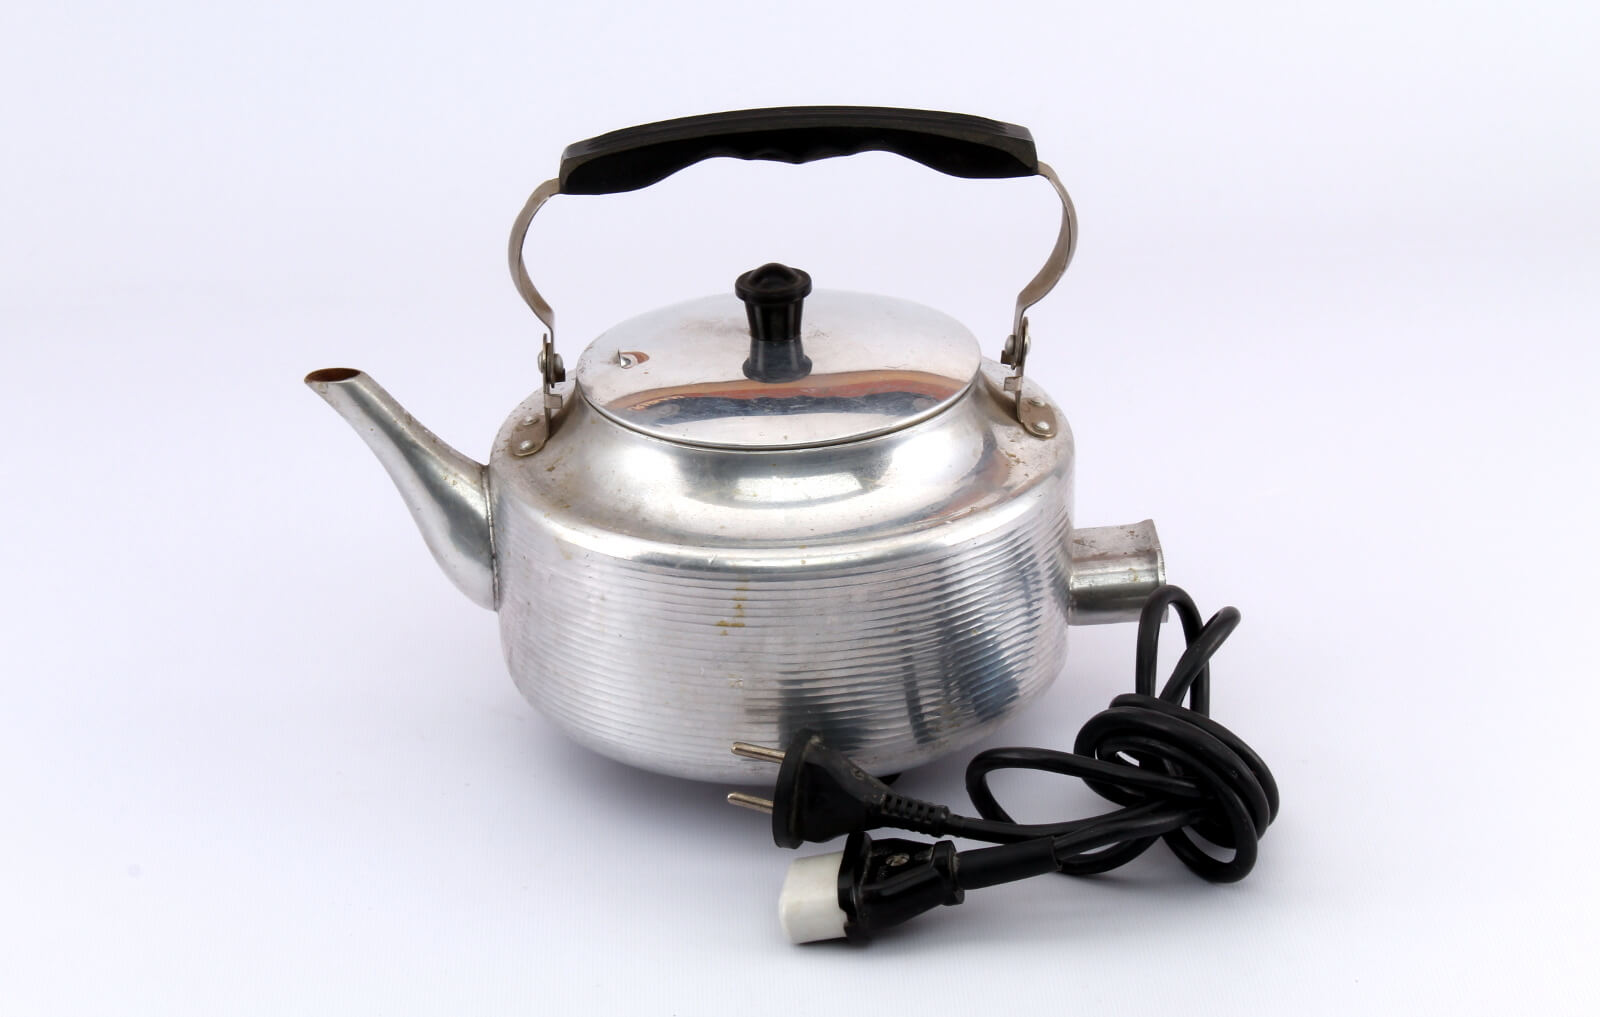 Why the kettle is noisy during operation?